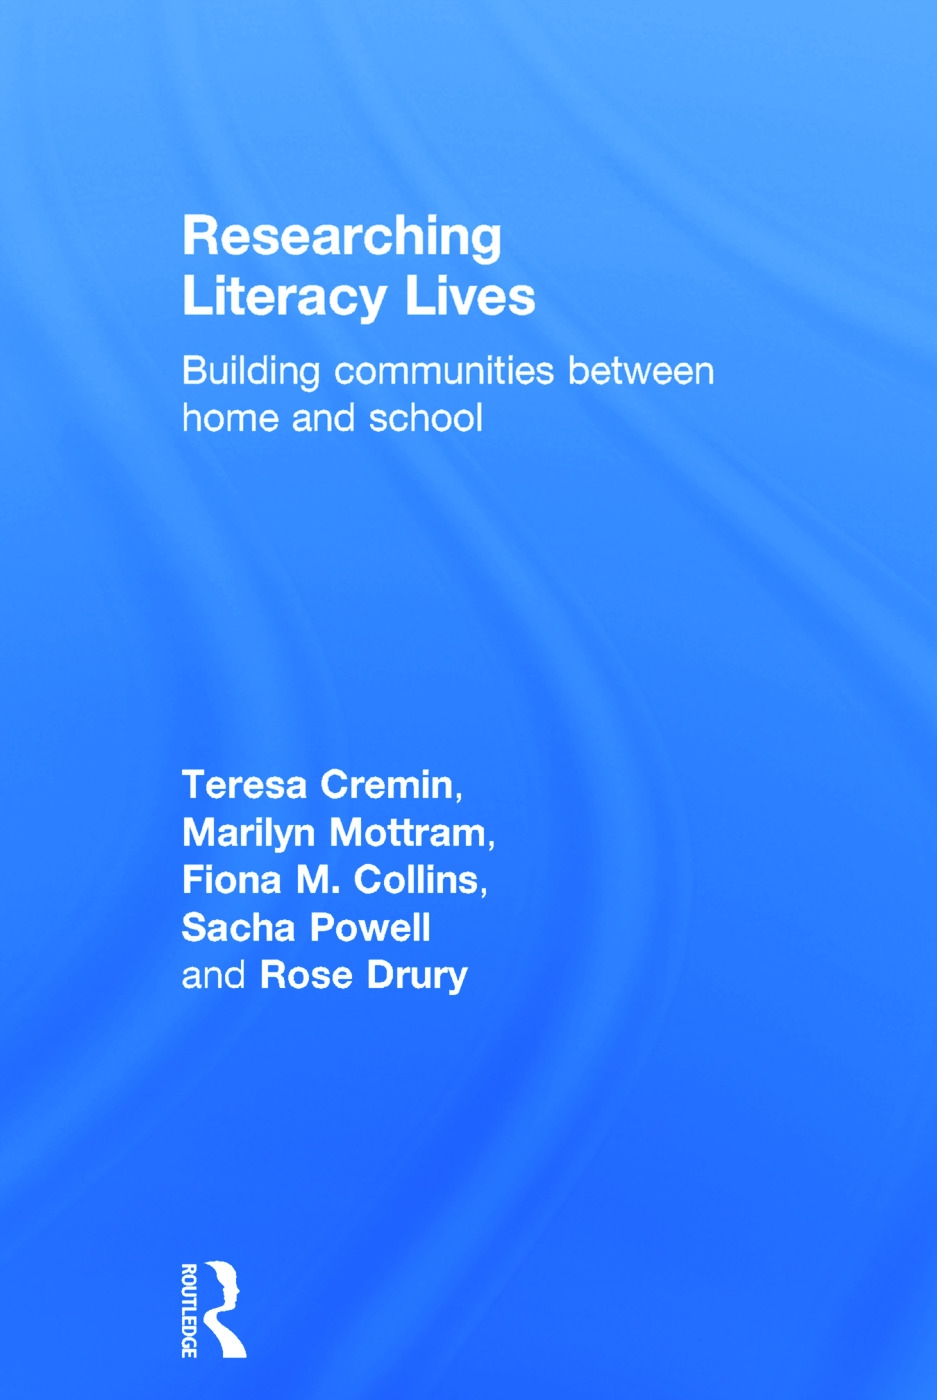 Researching Literacy Lives: Building Communities Between Home and School